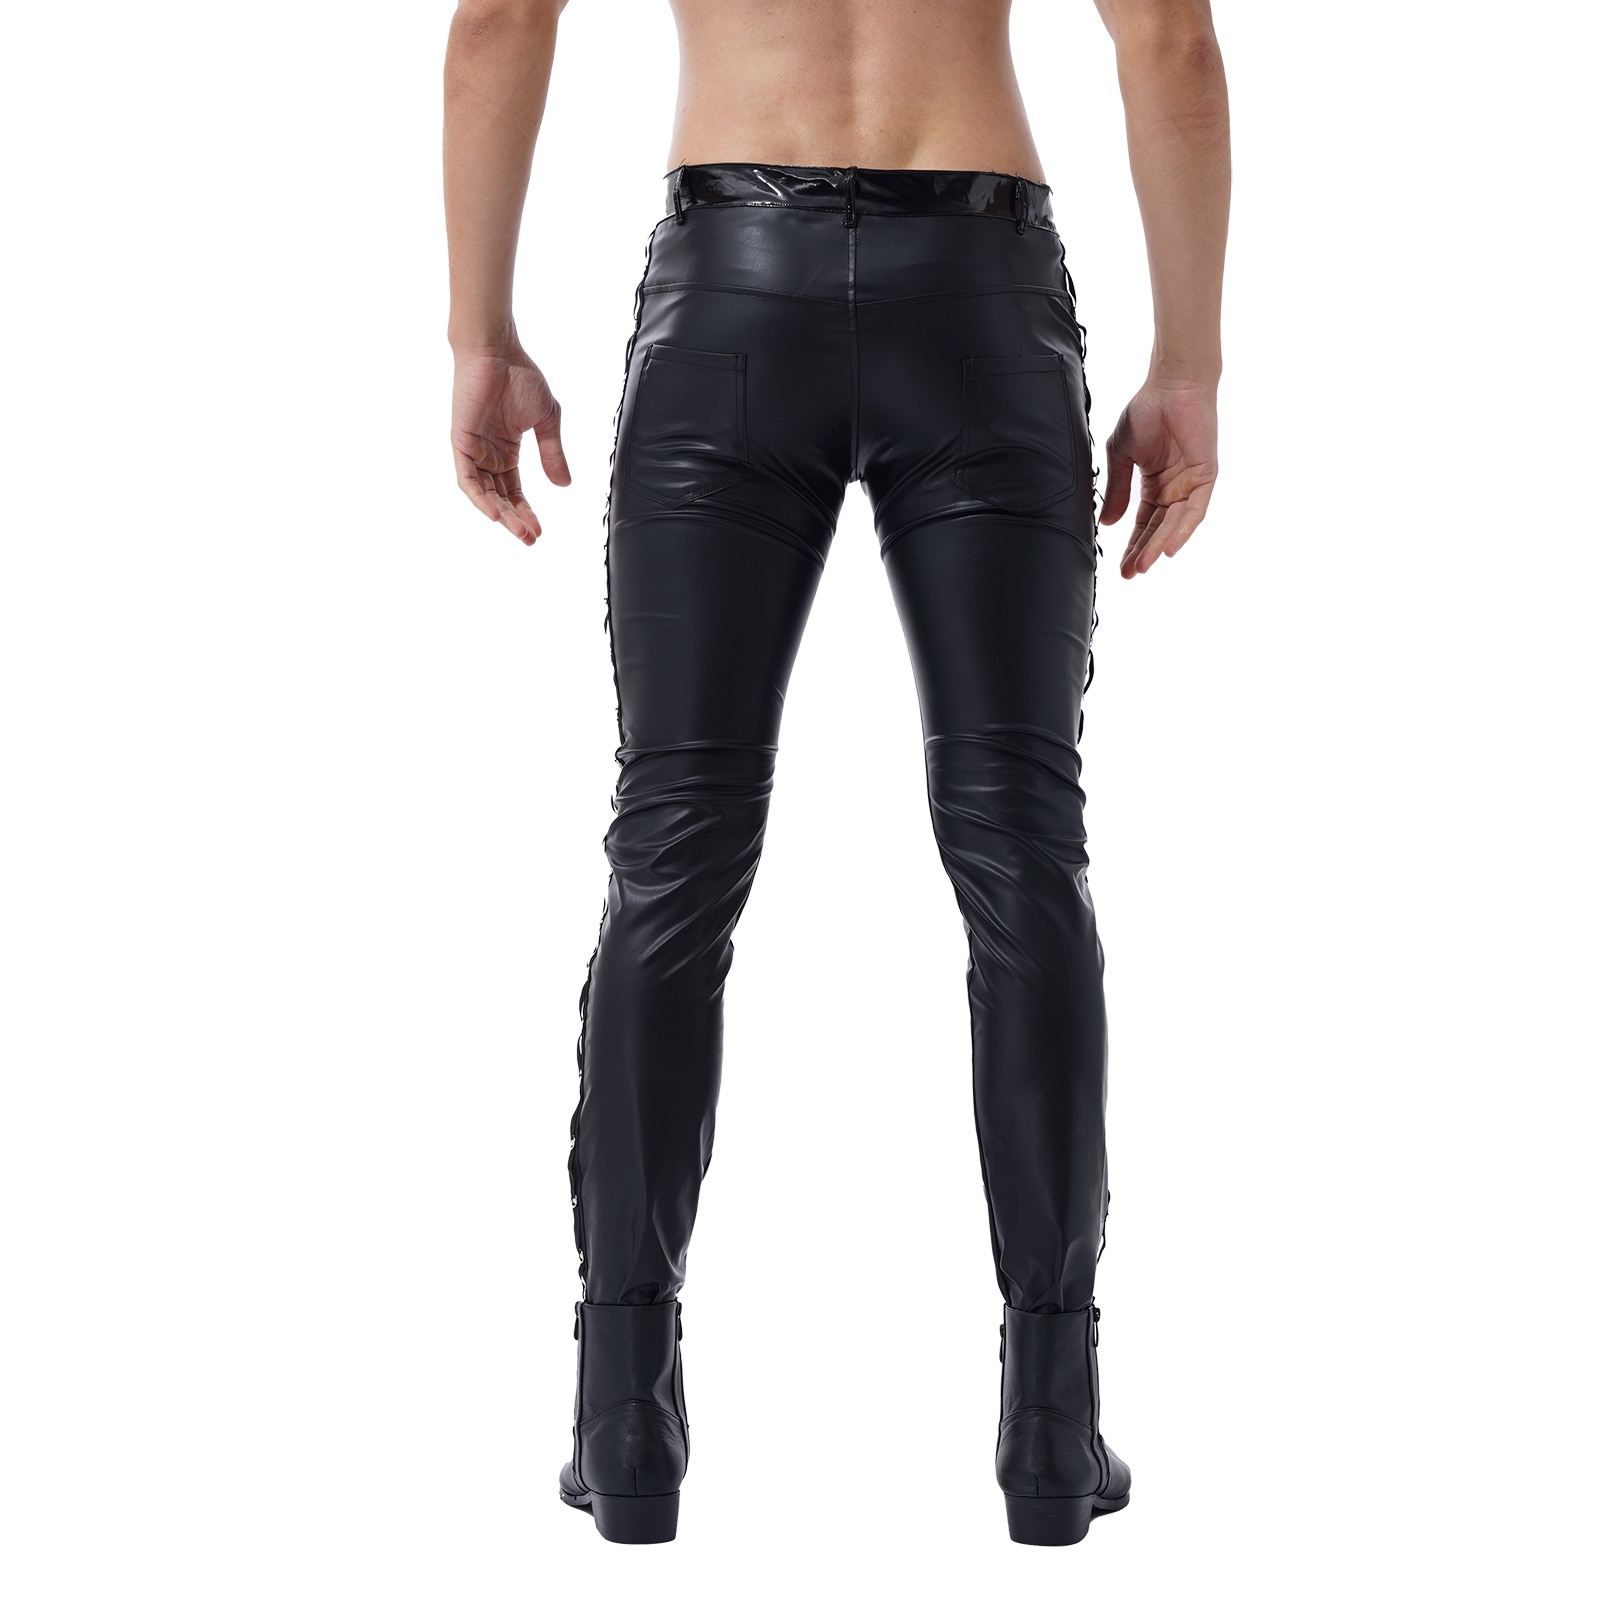 Mens-Faux-Leather-Pants-Black-Punk-Gothic-Wet-Look-Motor-Biker-Tights-Trousers-Stretch-Club-Stage-3.jpg